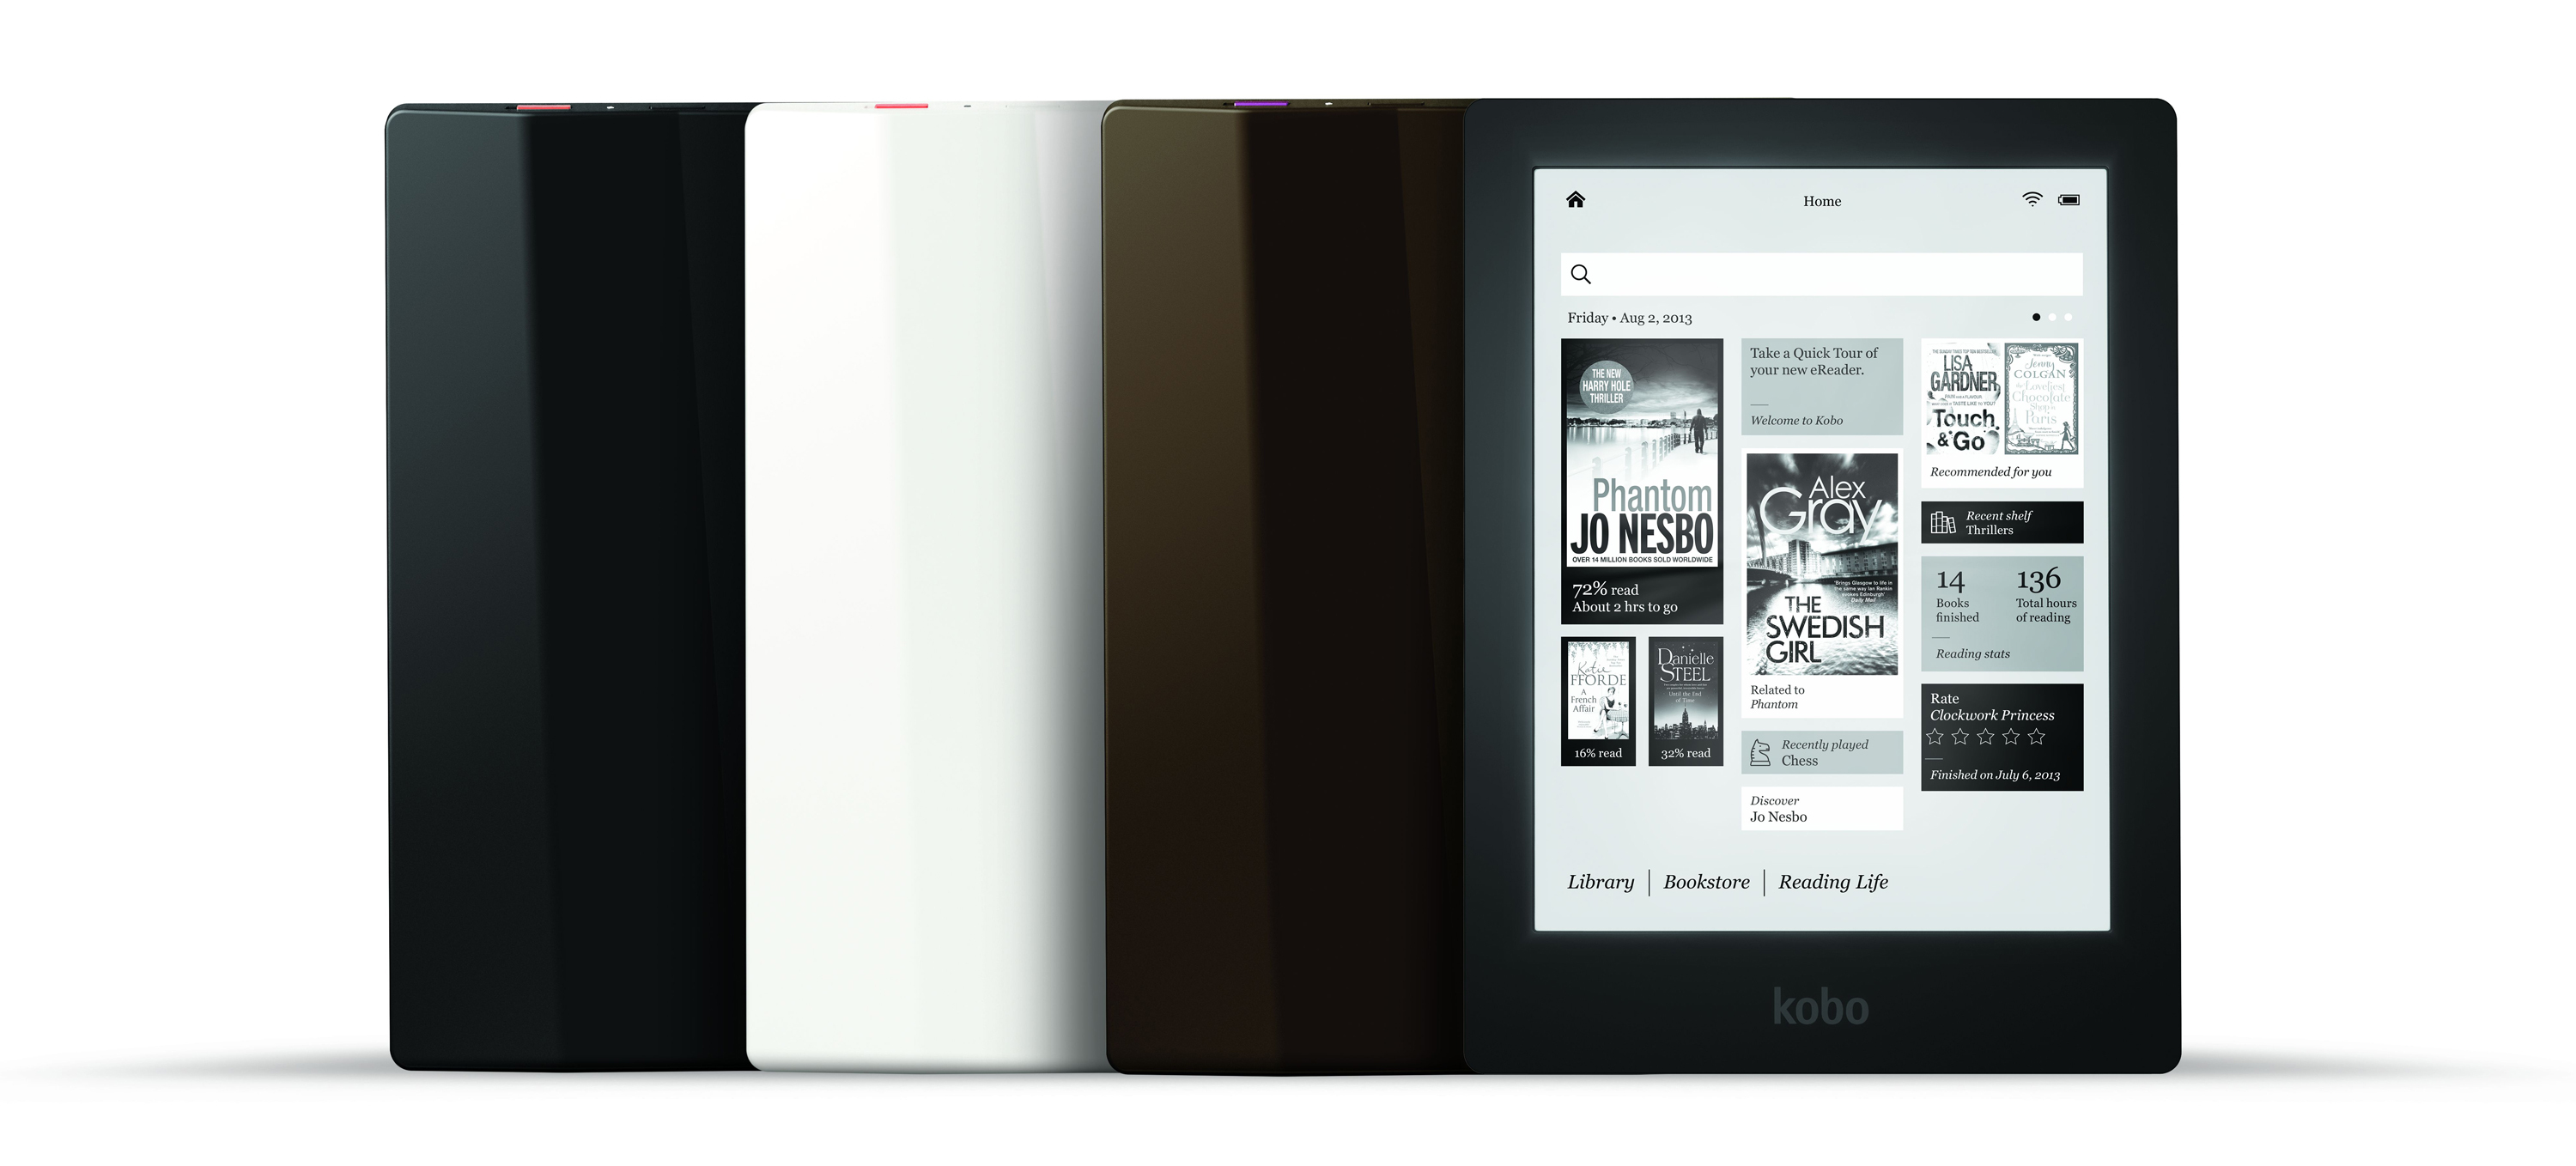 Kobo Unveils Limited Edition Kobo Aura HD Reader | Business Wire